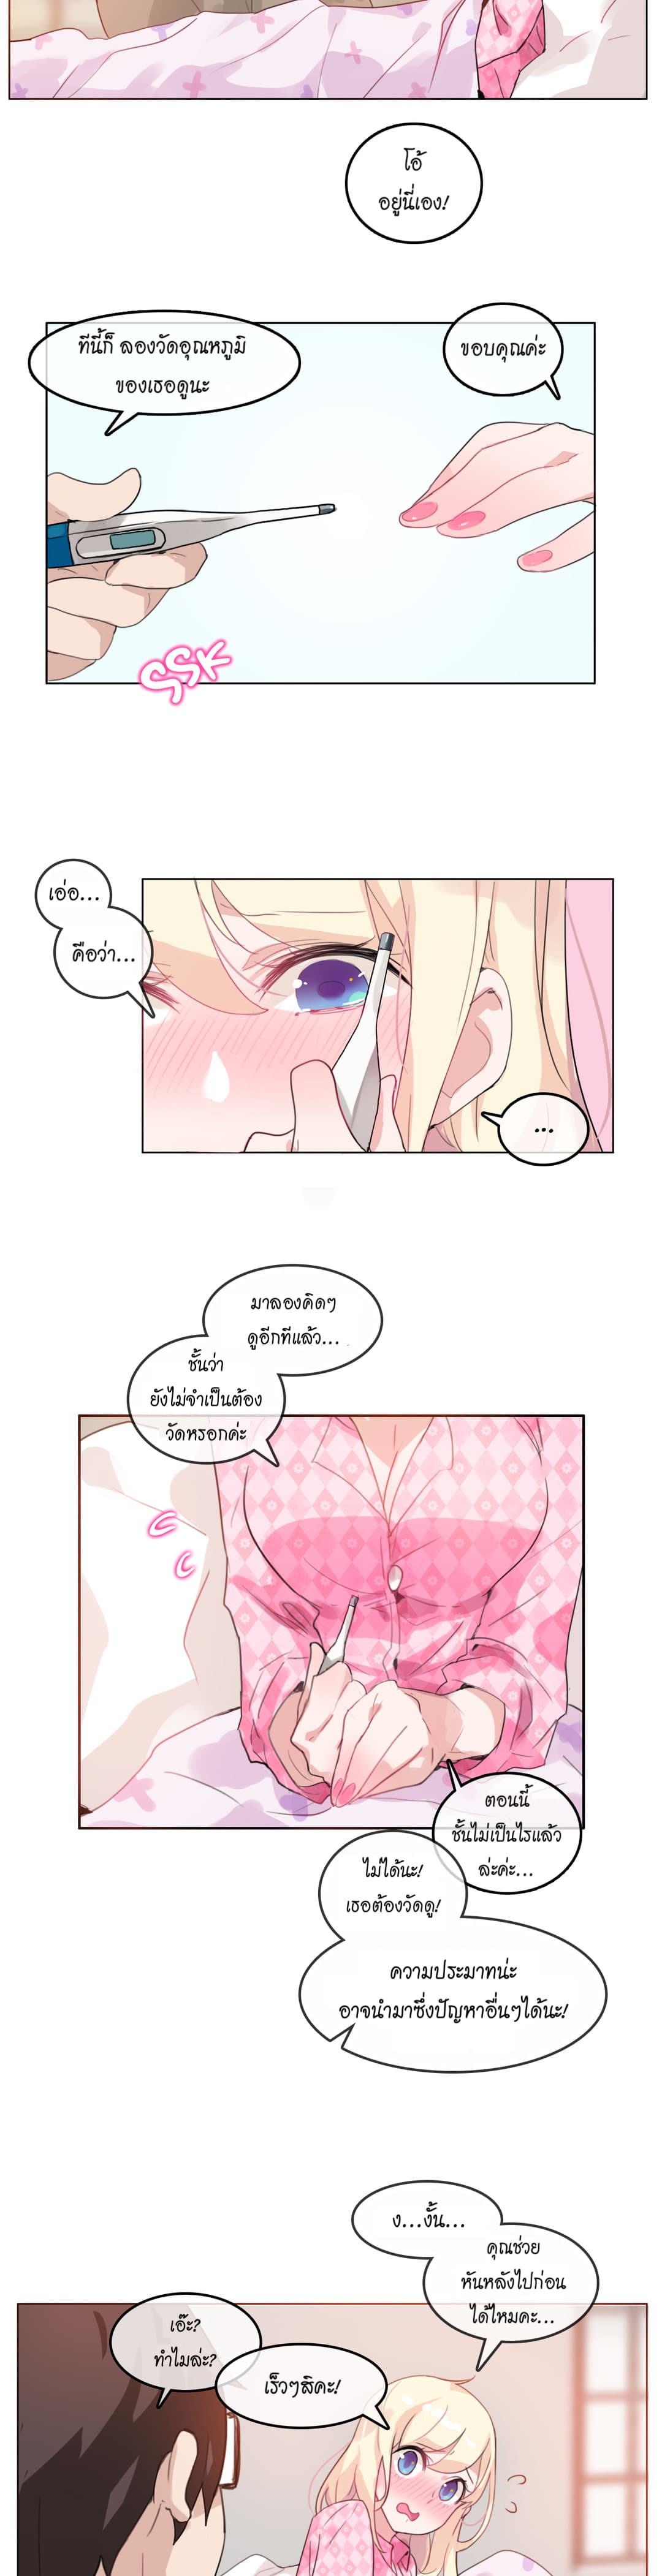 A Pervert’s Daily Life 15 (16)